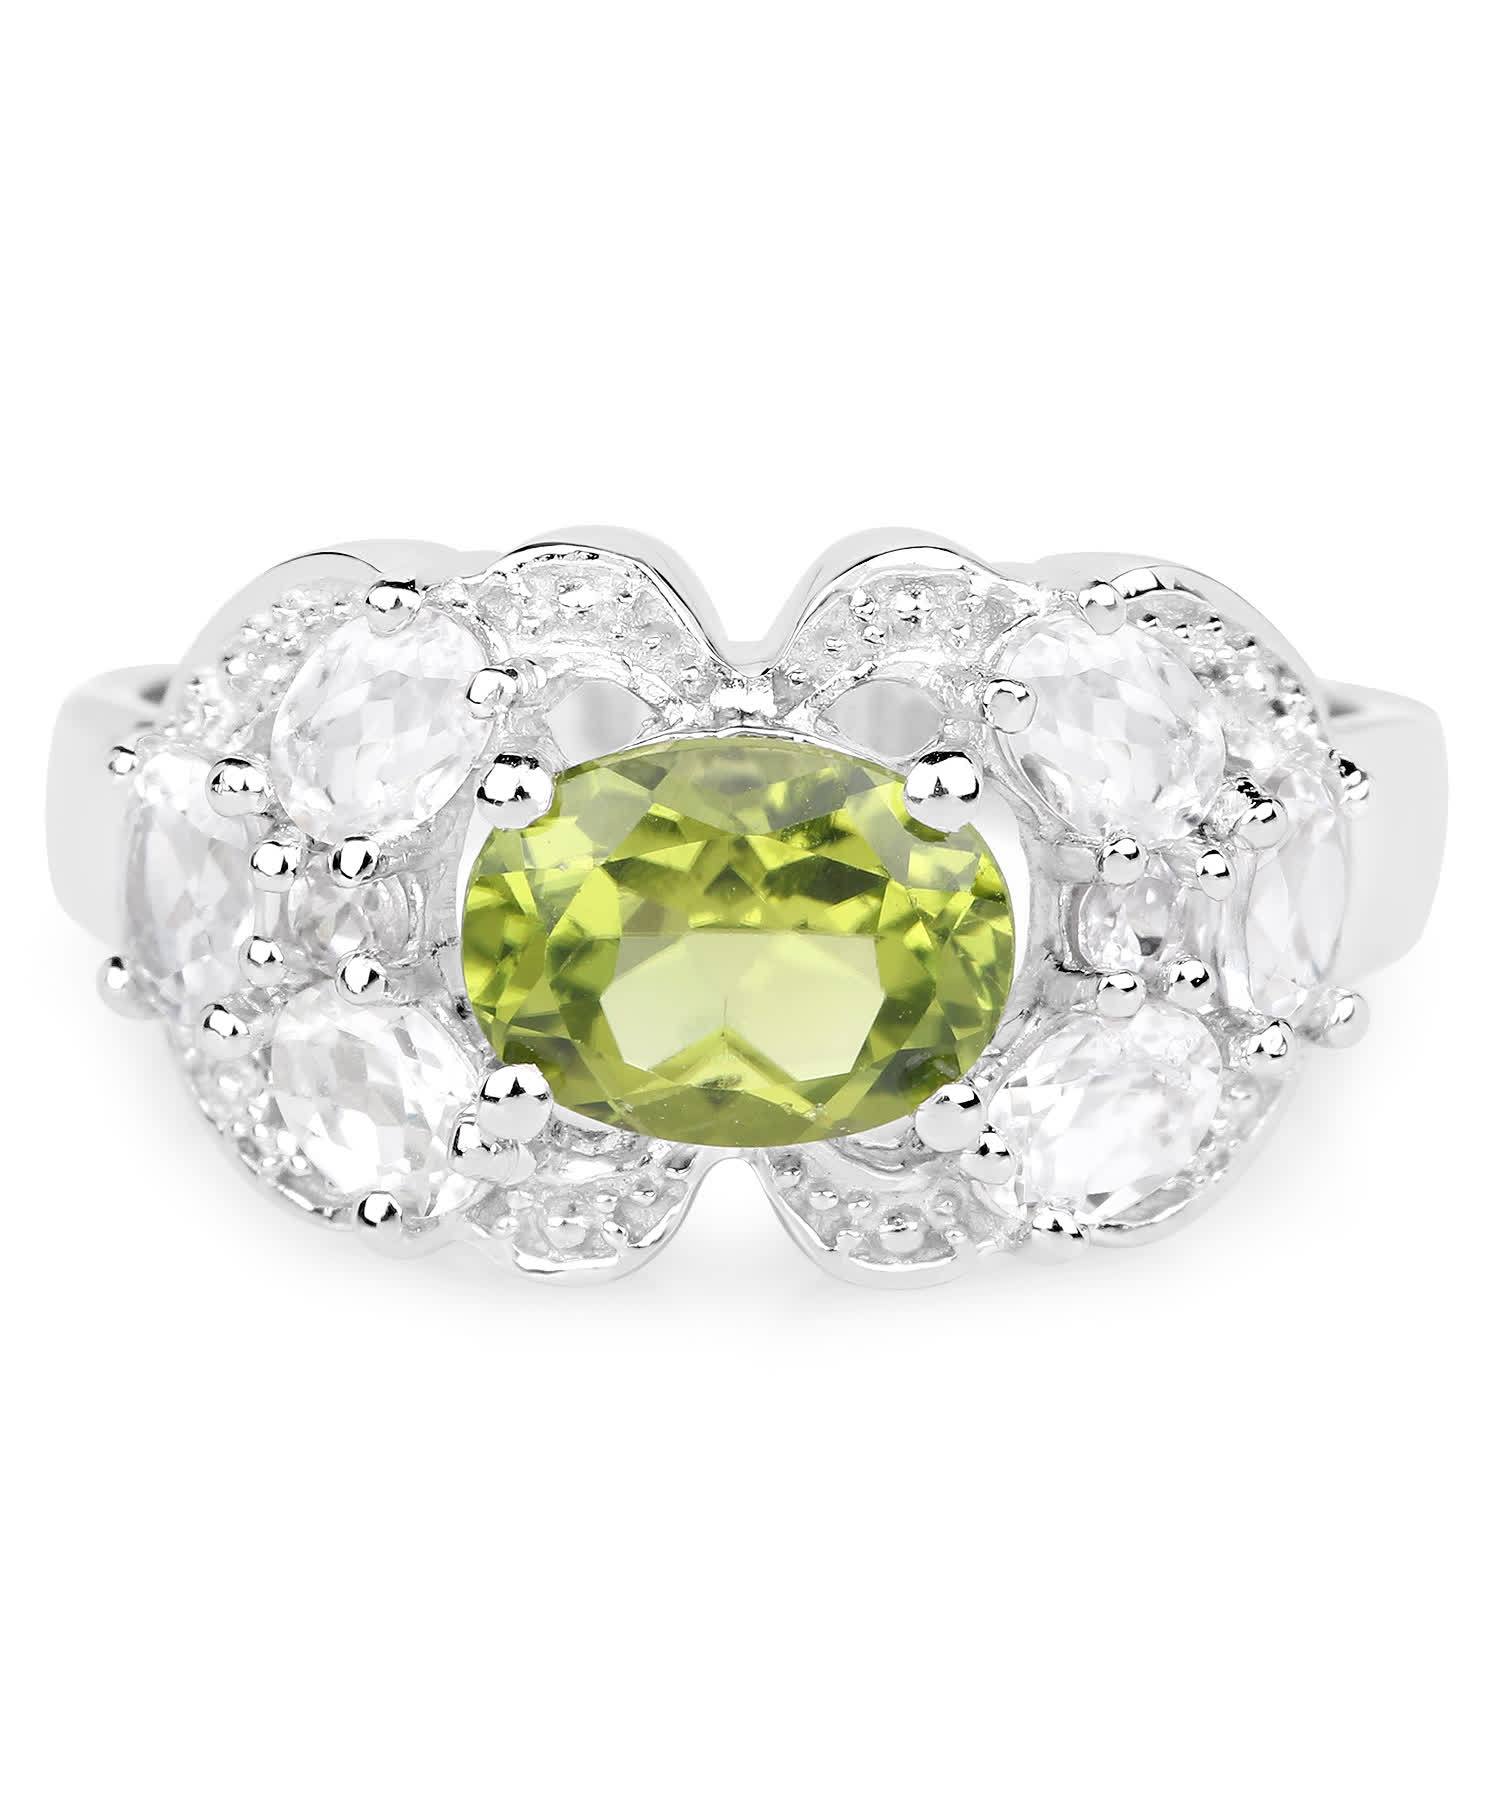 2.70ctw Natural Lime Peridot and Zircon Rhodium Plated 925 Sterling Silver Ring View 3